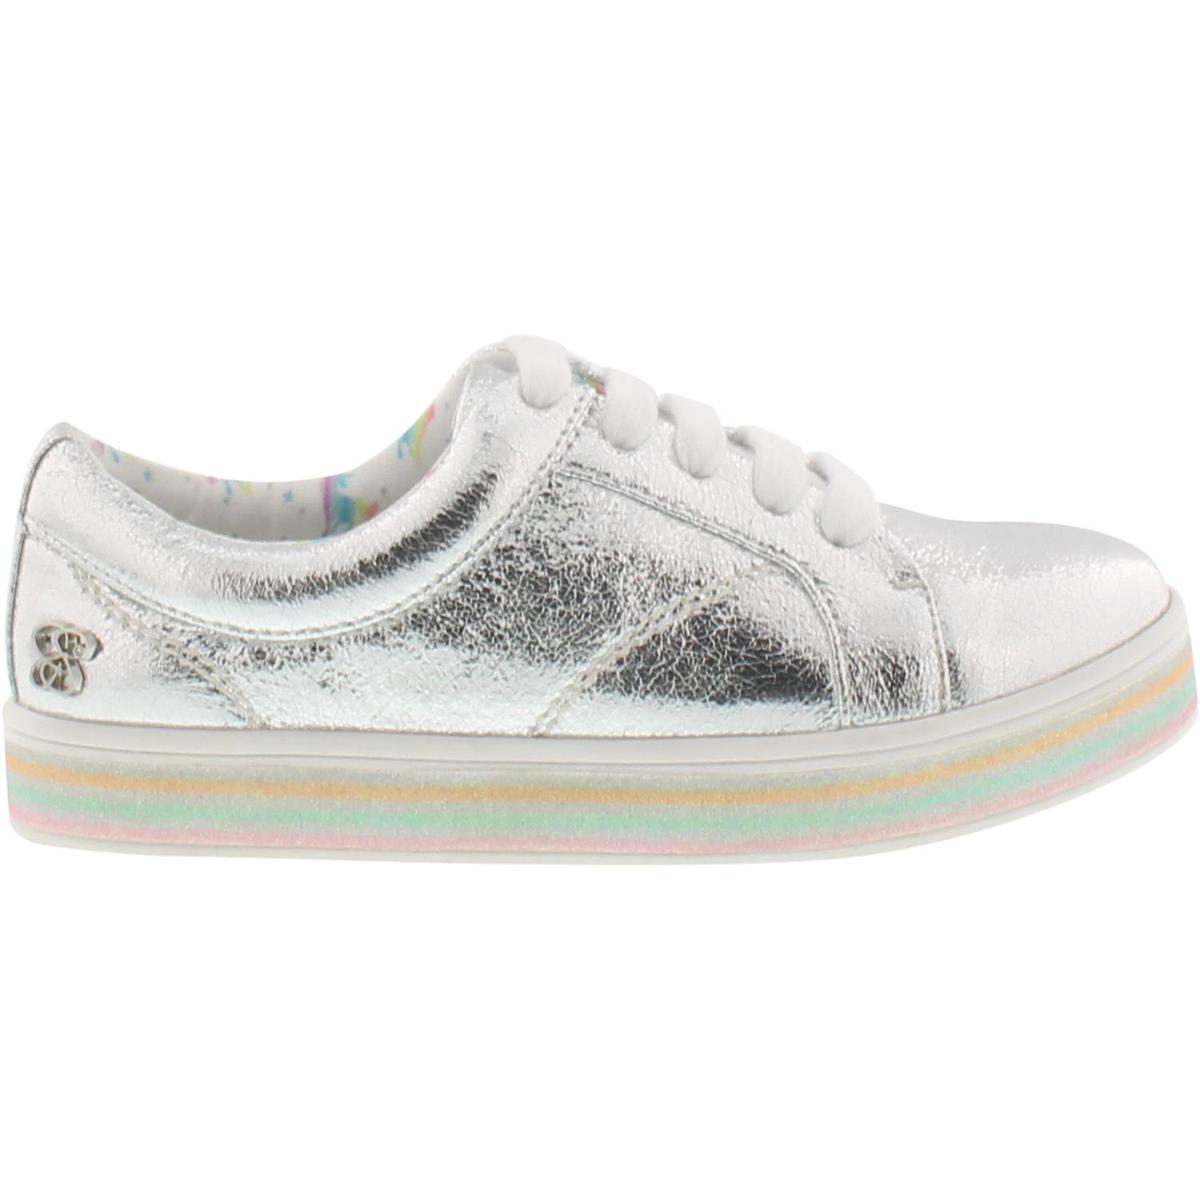 Jessica Simpson Casey Sophie Low Top Oxford Sneaker (Little Girls and Big Girls) - image 1 of 2